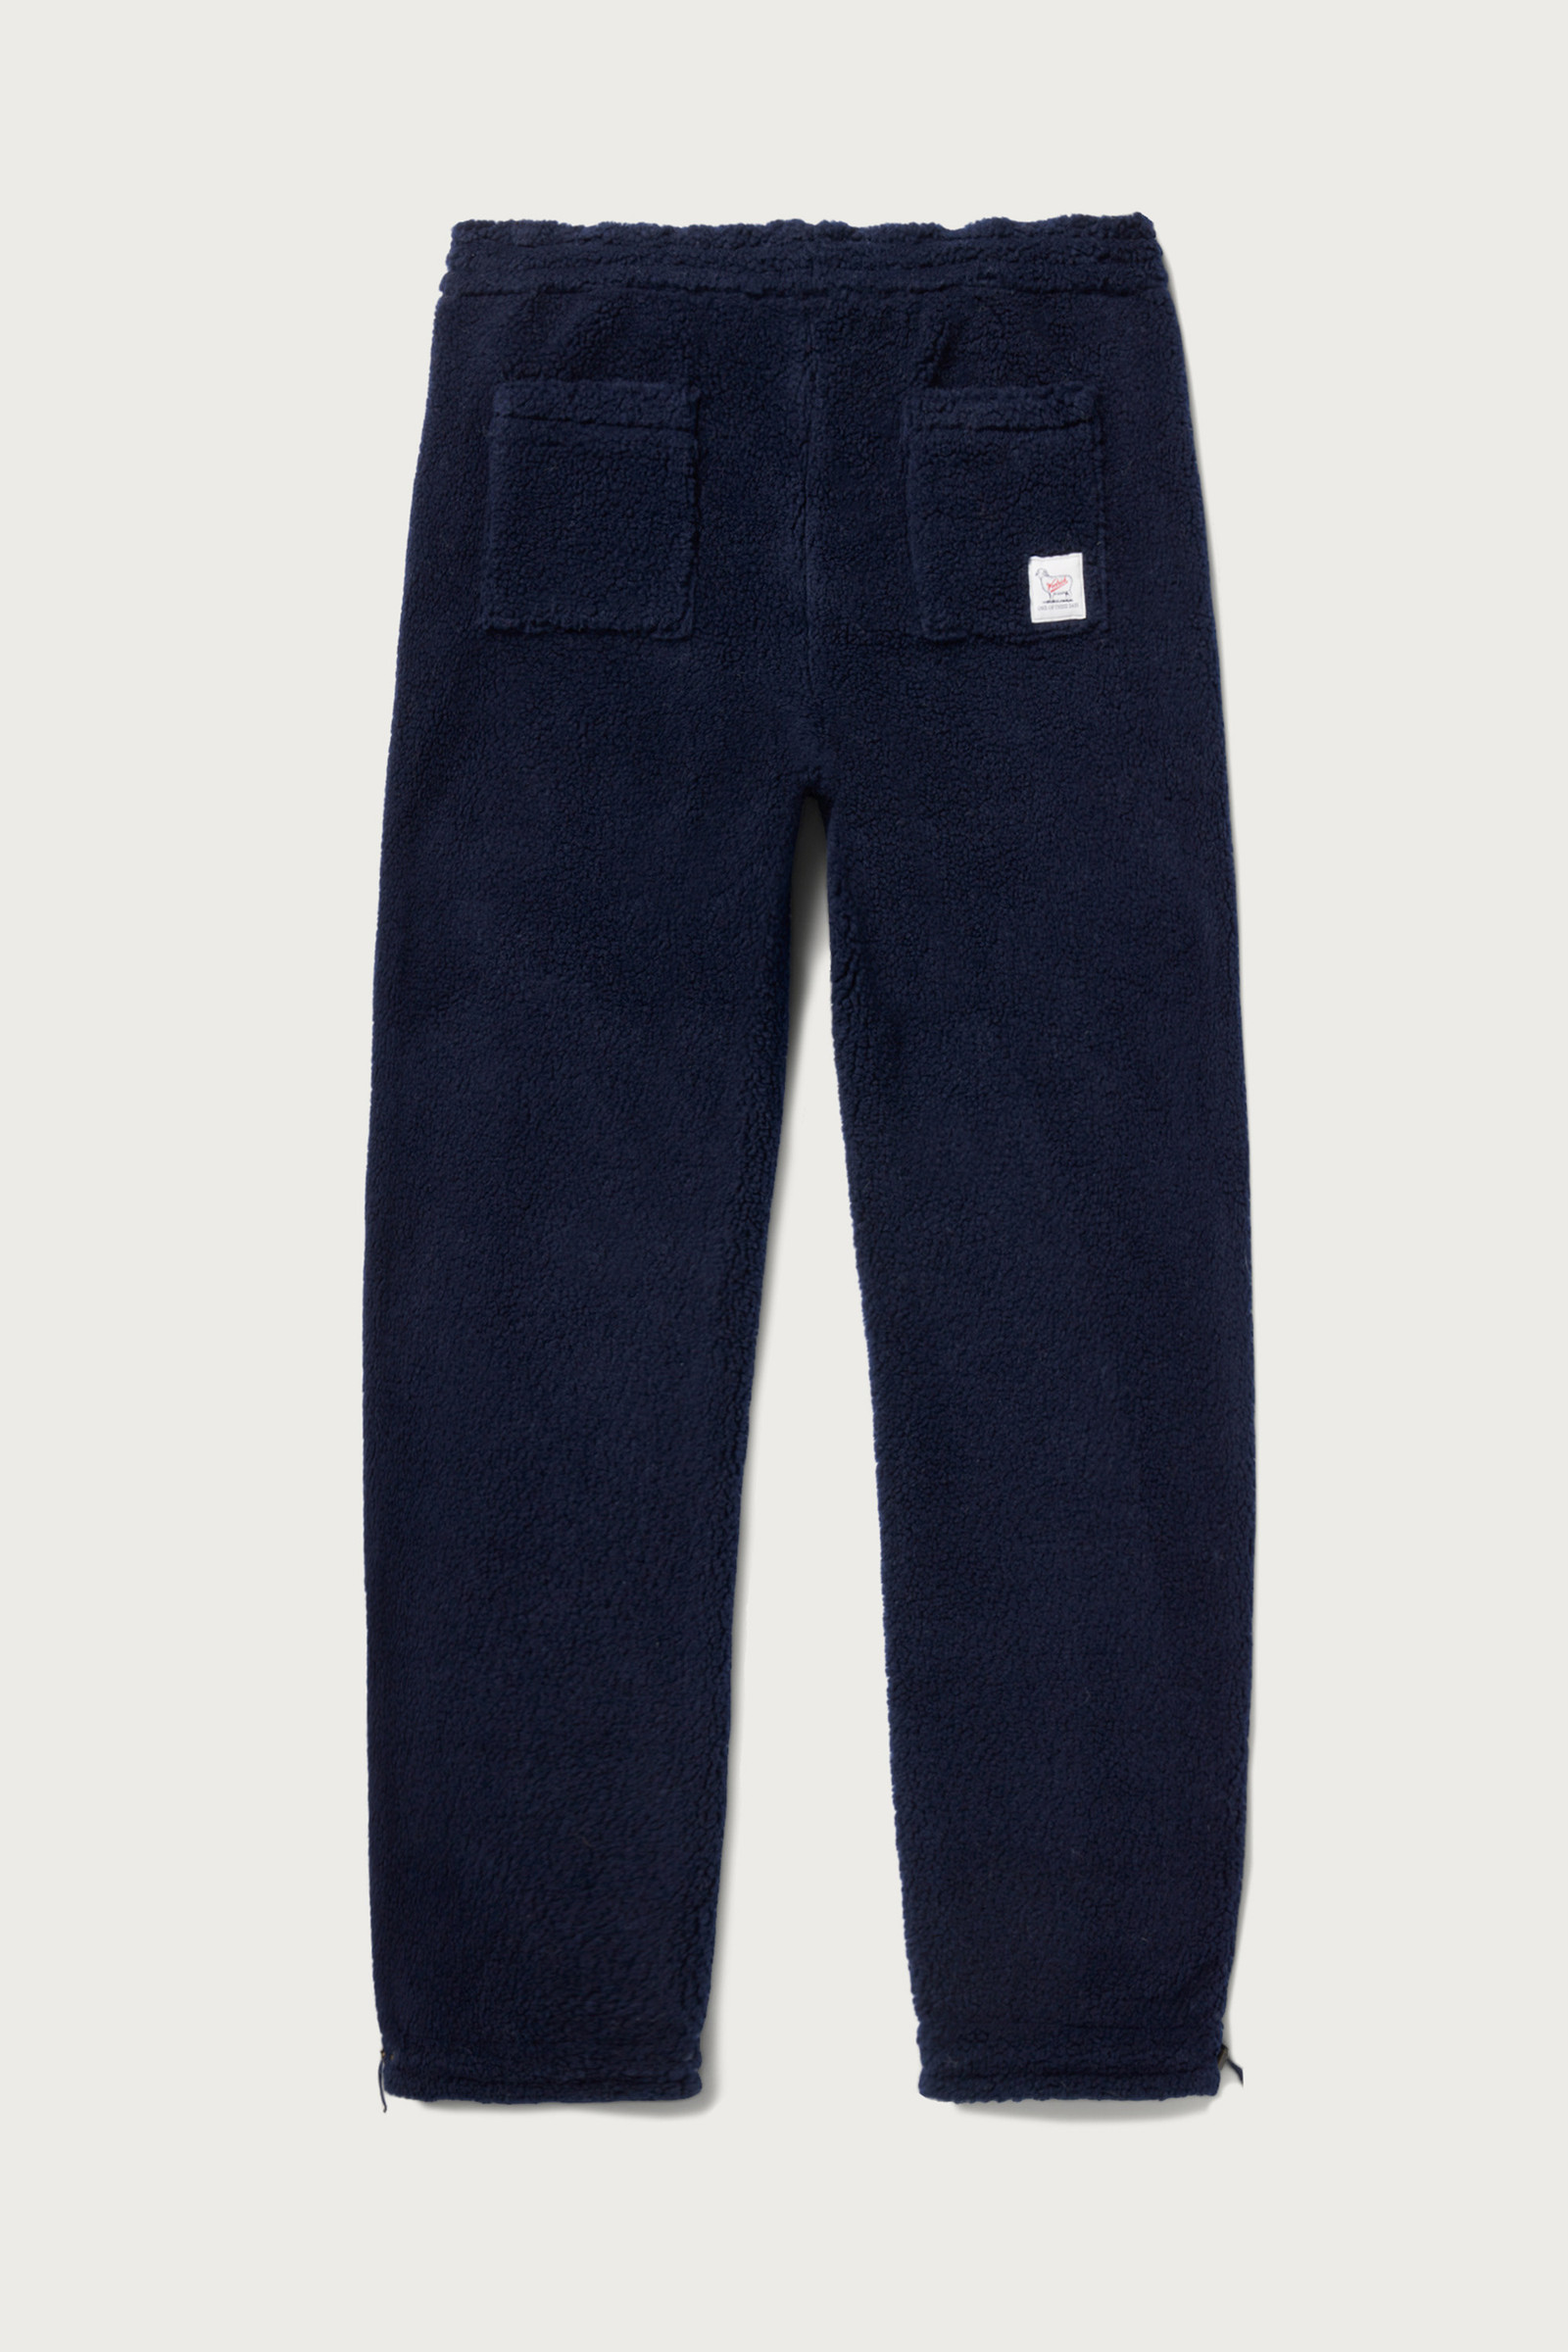 Men's Sherpa Sport Pants - One Of These Days / Woolrich Blue | Woolrich USA